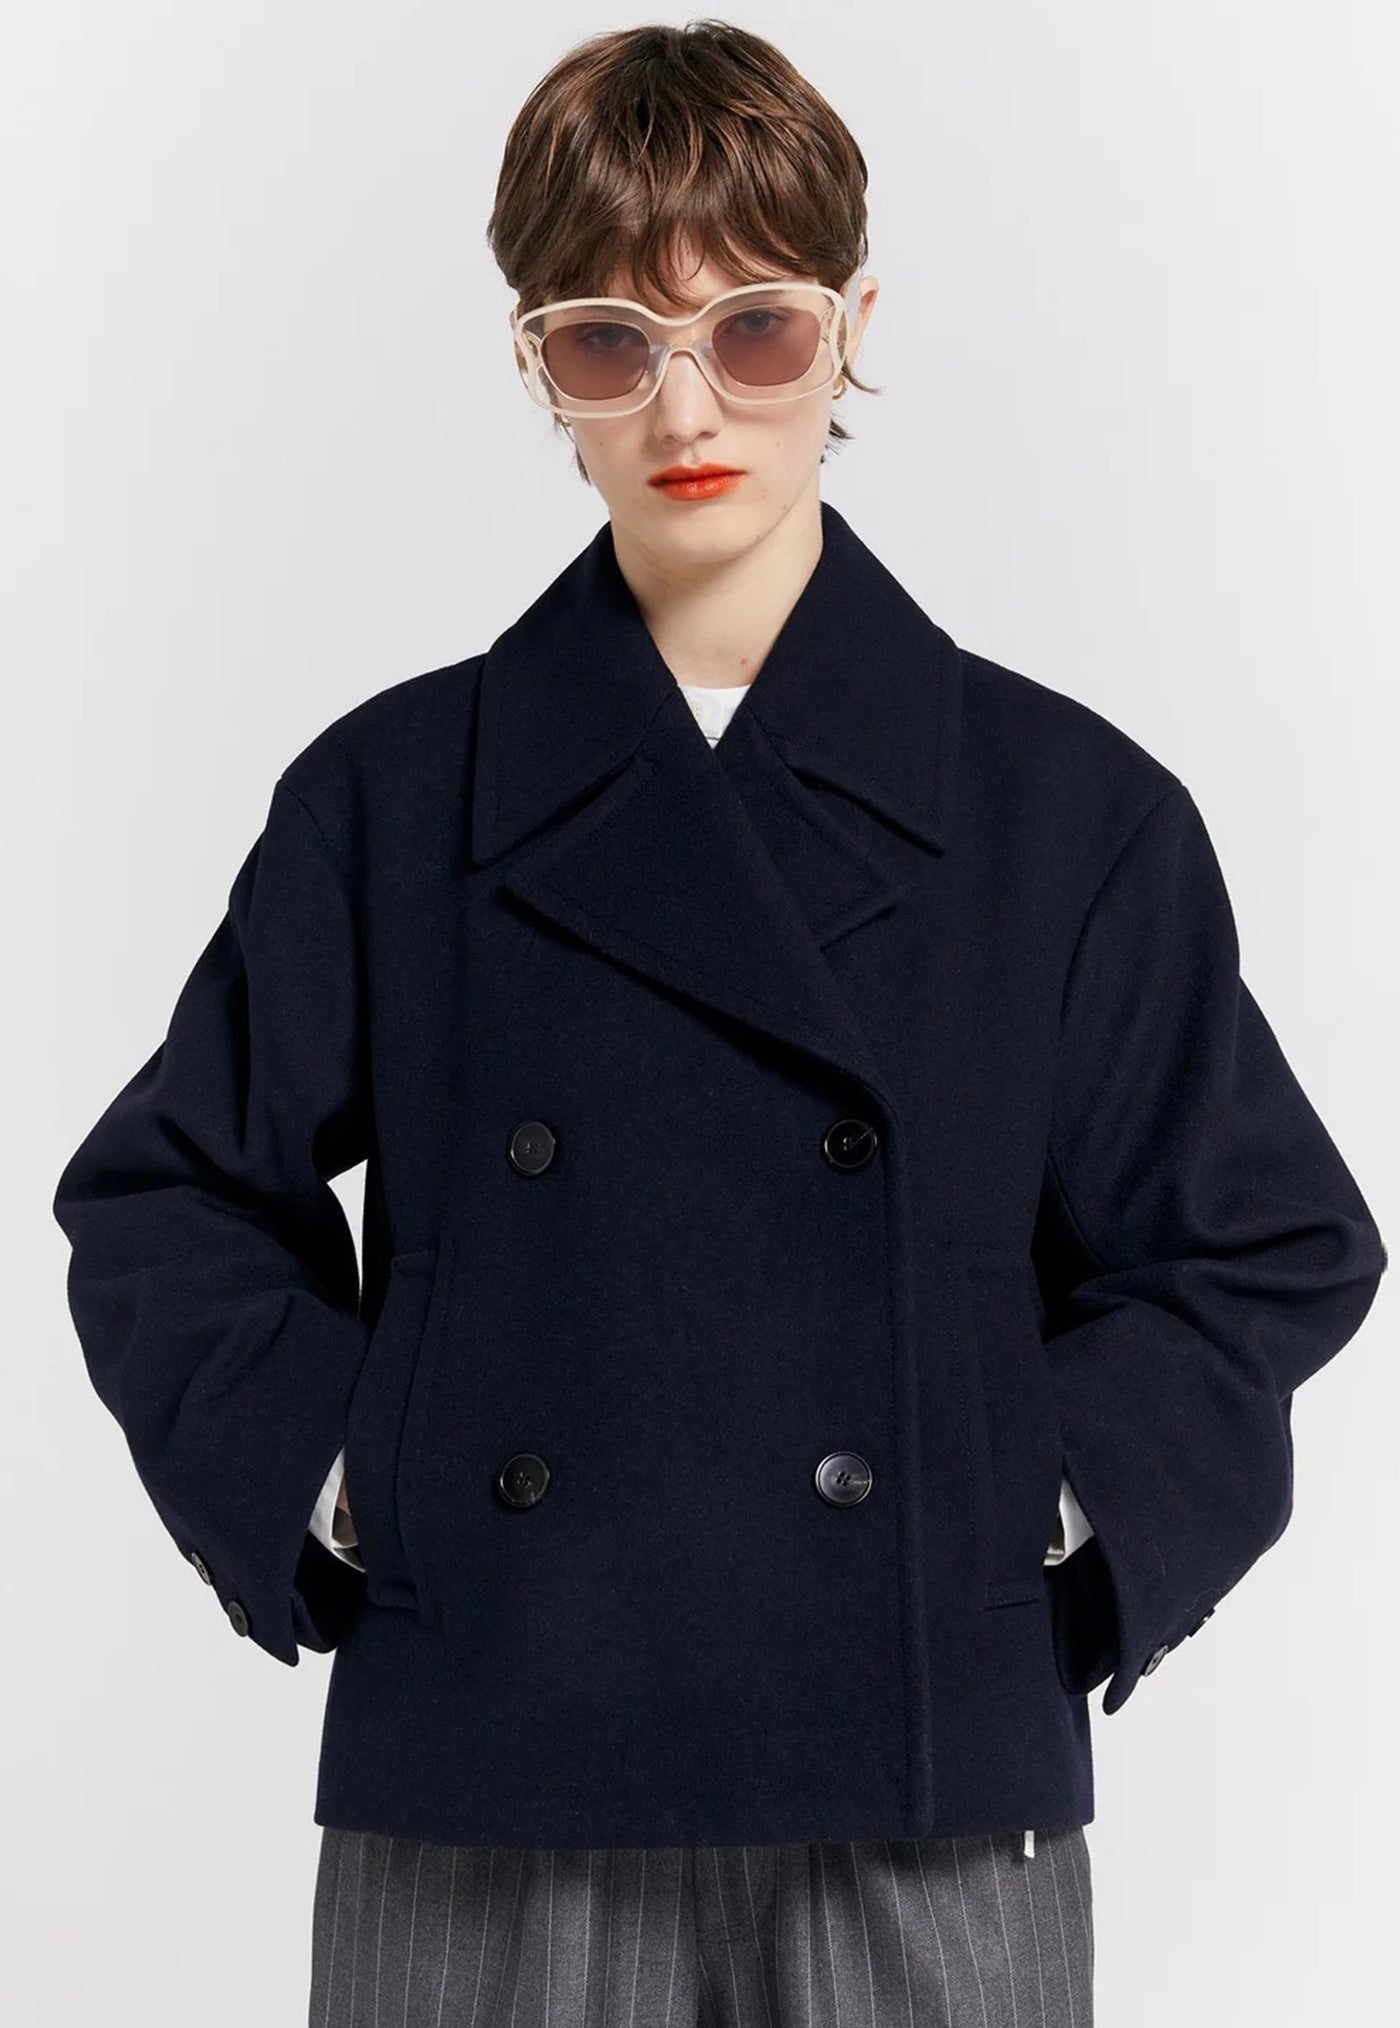 Cropped Peacoat - Navy sold by Angel Divine